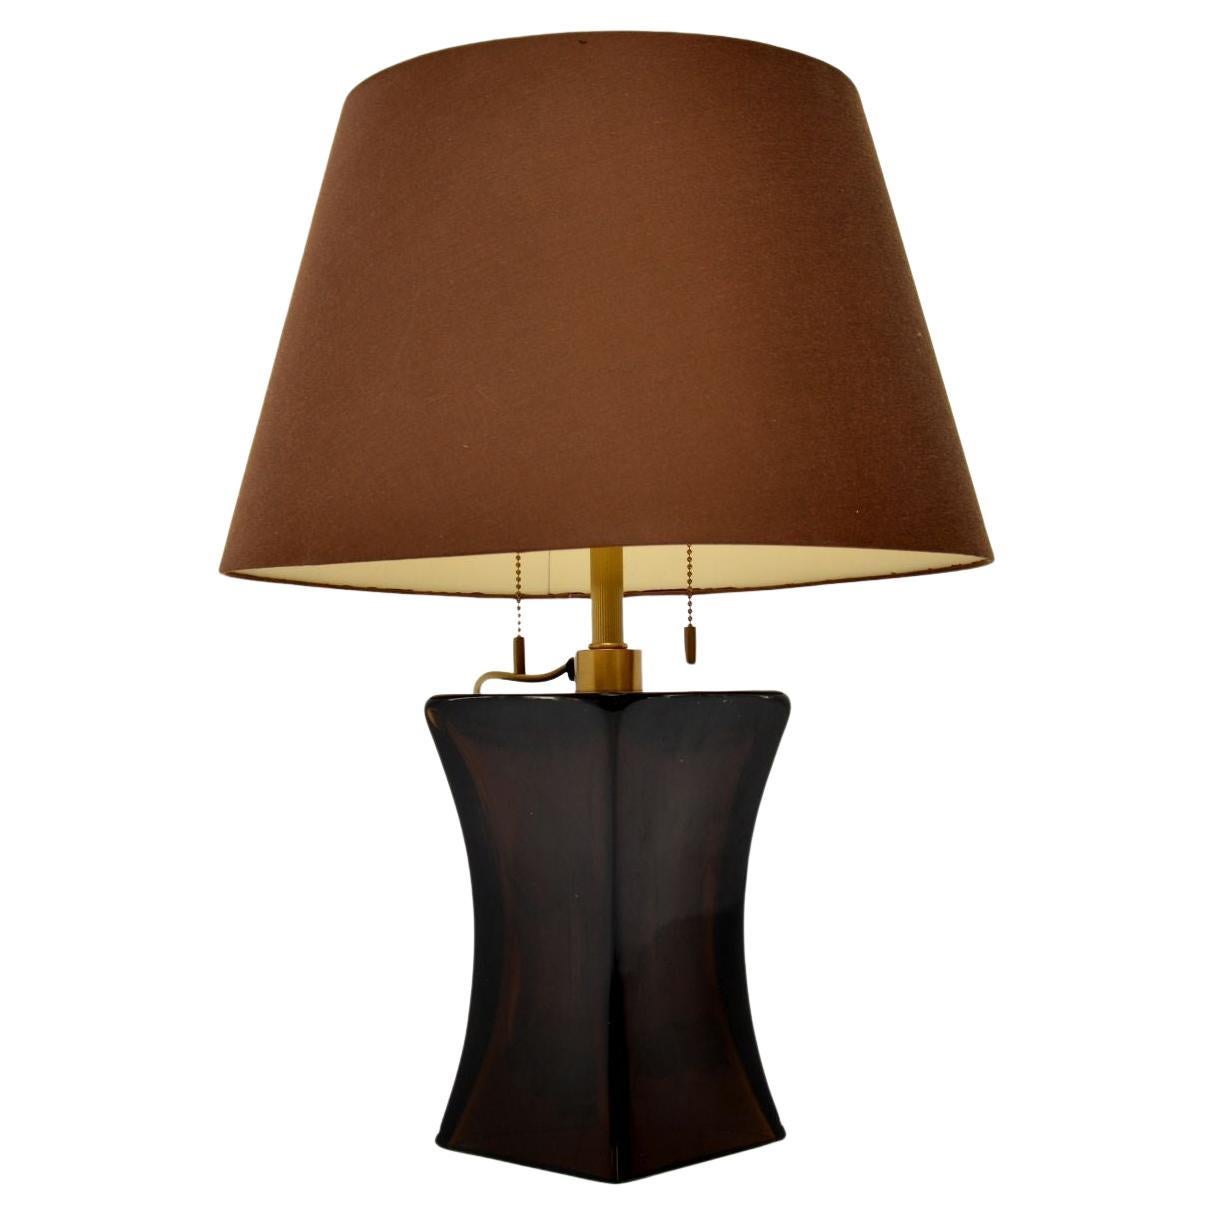 Italian Murano Glass Torre Table Lamp by Donghia